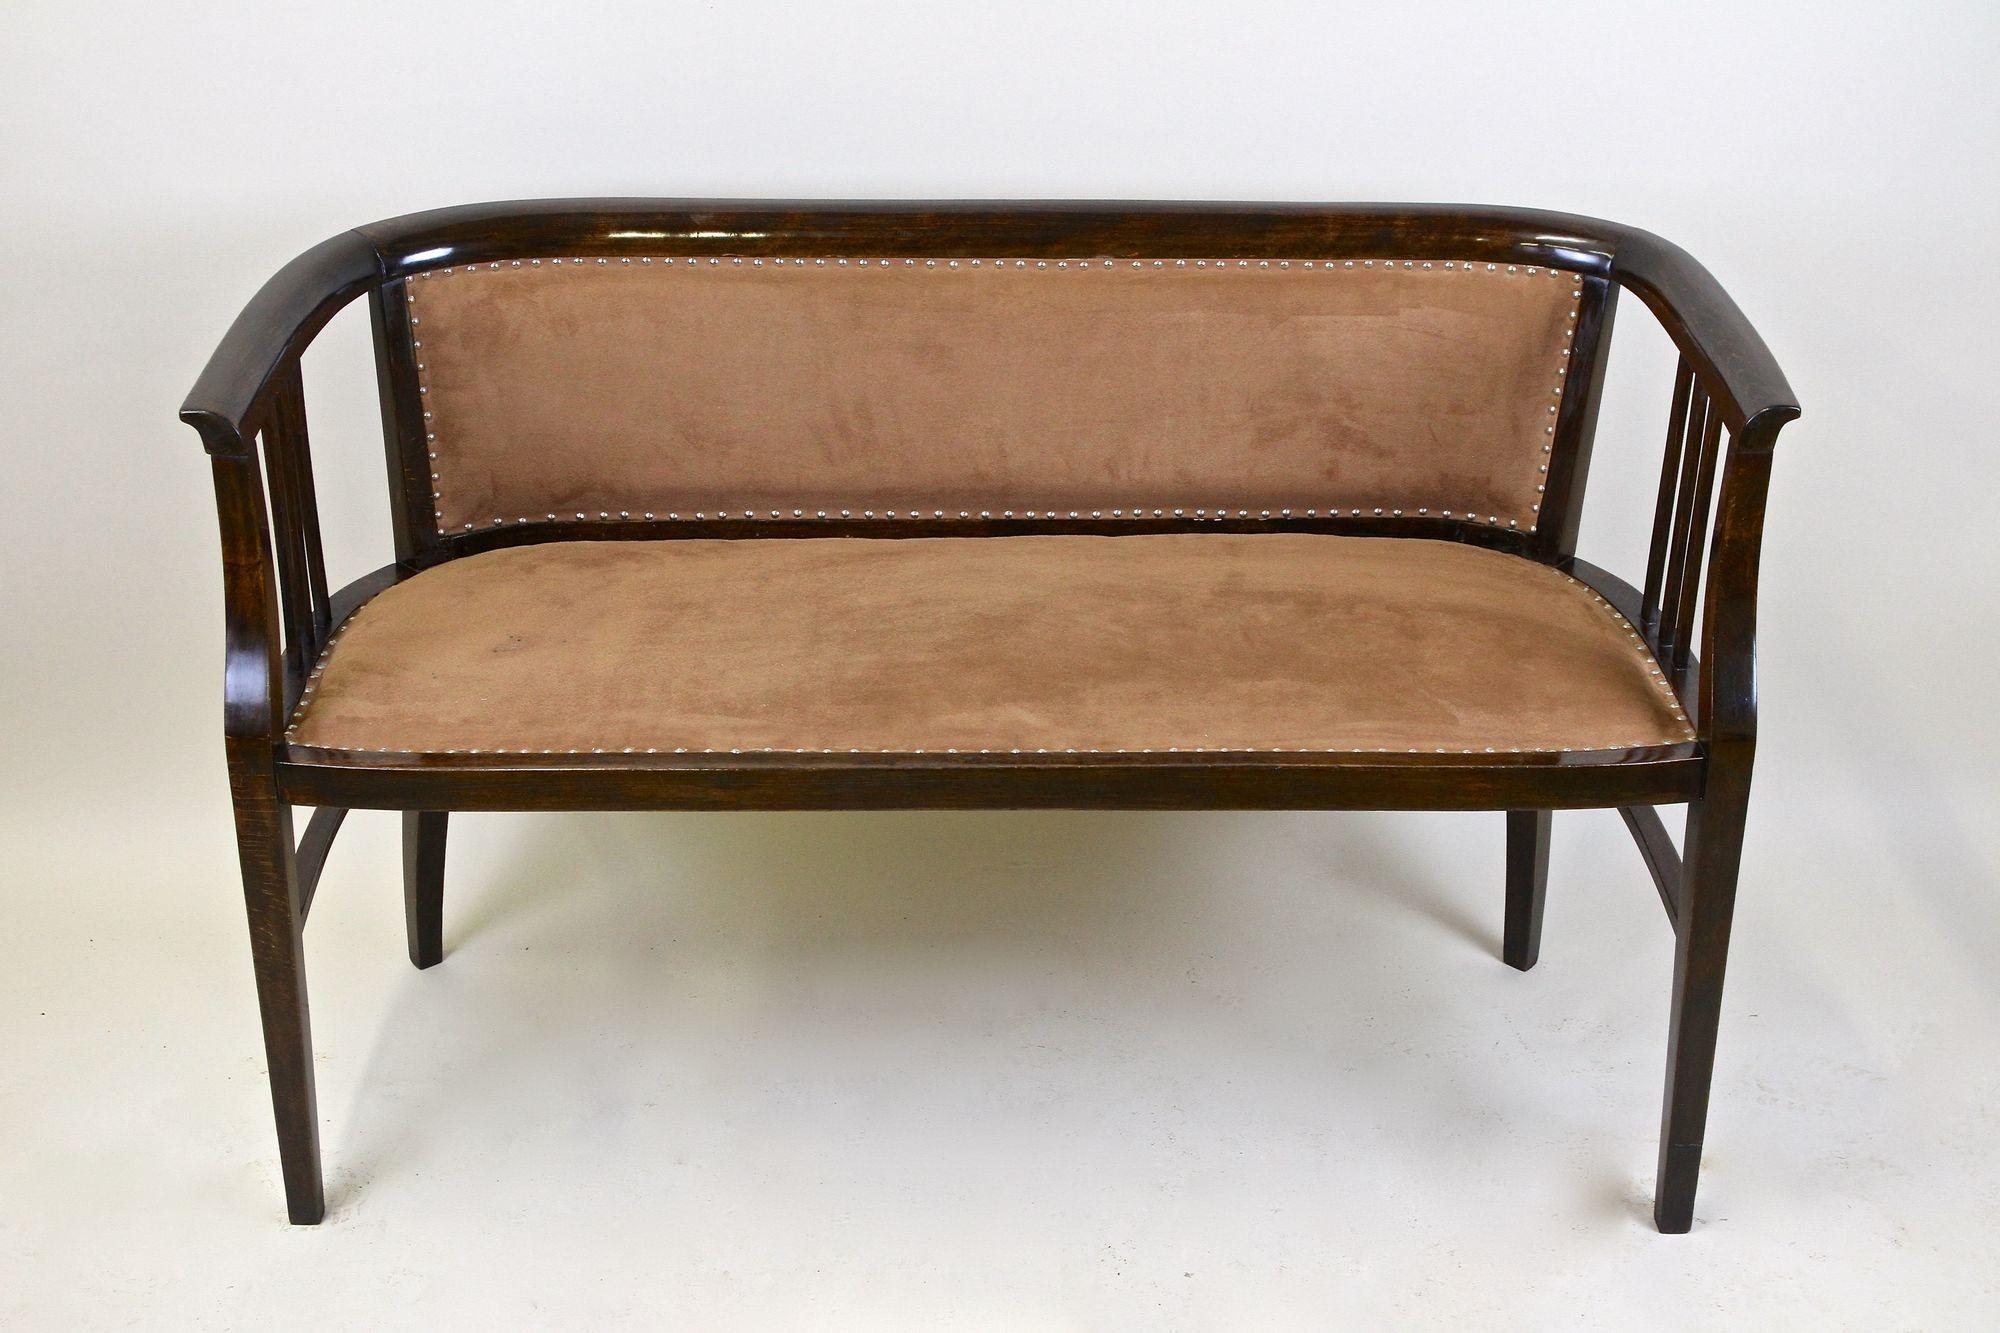 Austrian 20th Century Art Nouveau Bentwood Bench, Newly Upholstered, Austria, circa 1910 For Sale